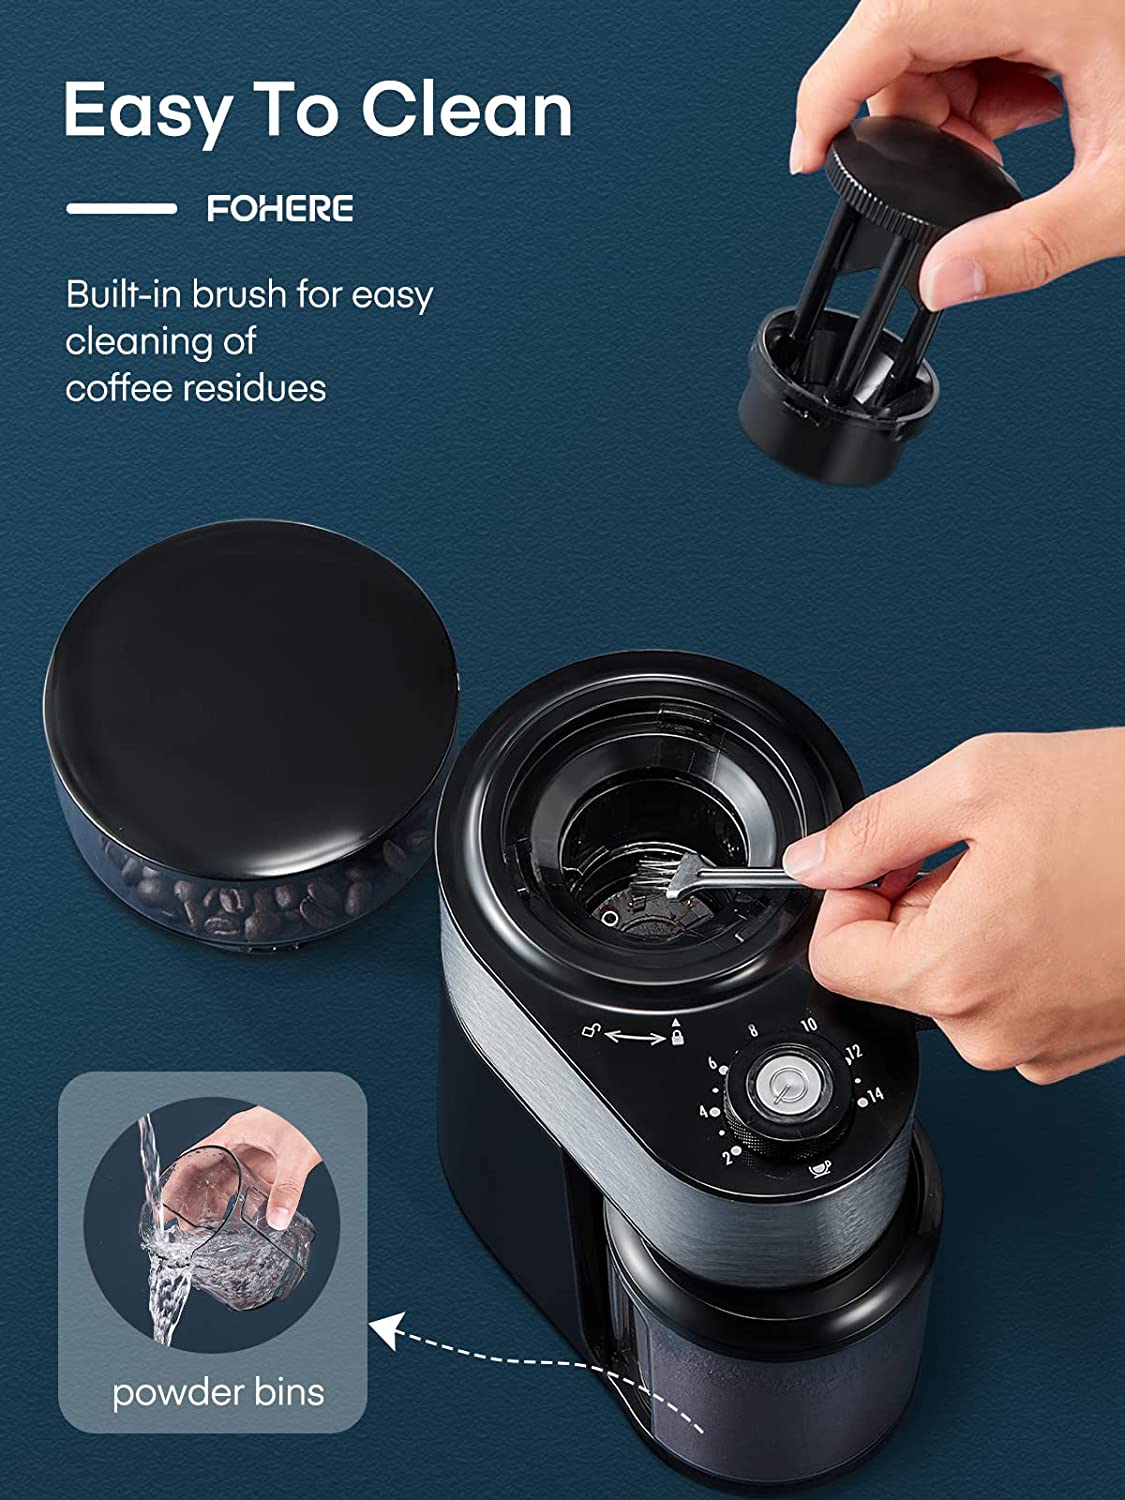 easy to clean, Coffee Grinder Electric, FOHERE Coffee Bean Grinder with 18 Precise Grind Settings, 2-14 Cup for Drip, Percolator, French Press, Espresso and Turkish Coffee Makers, Black